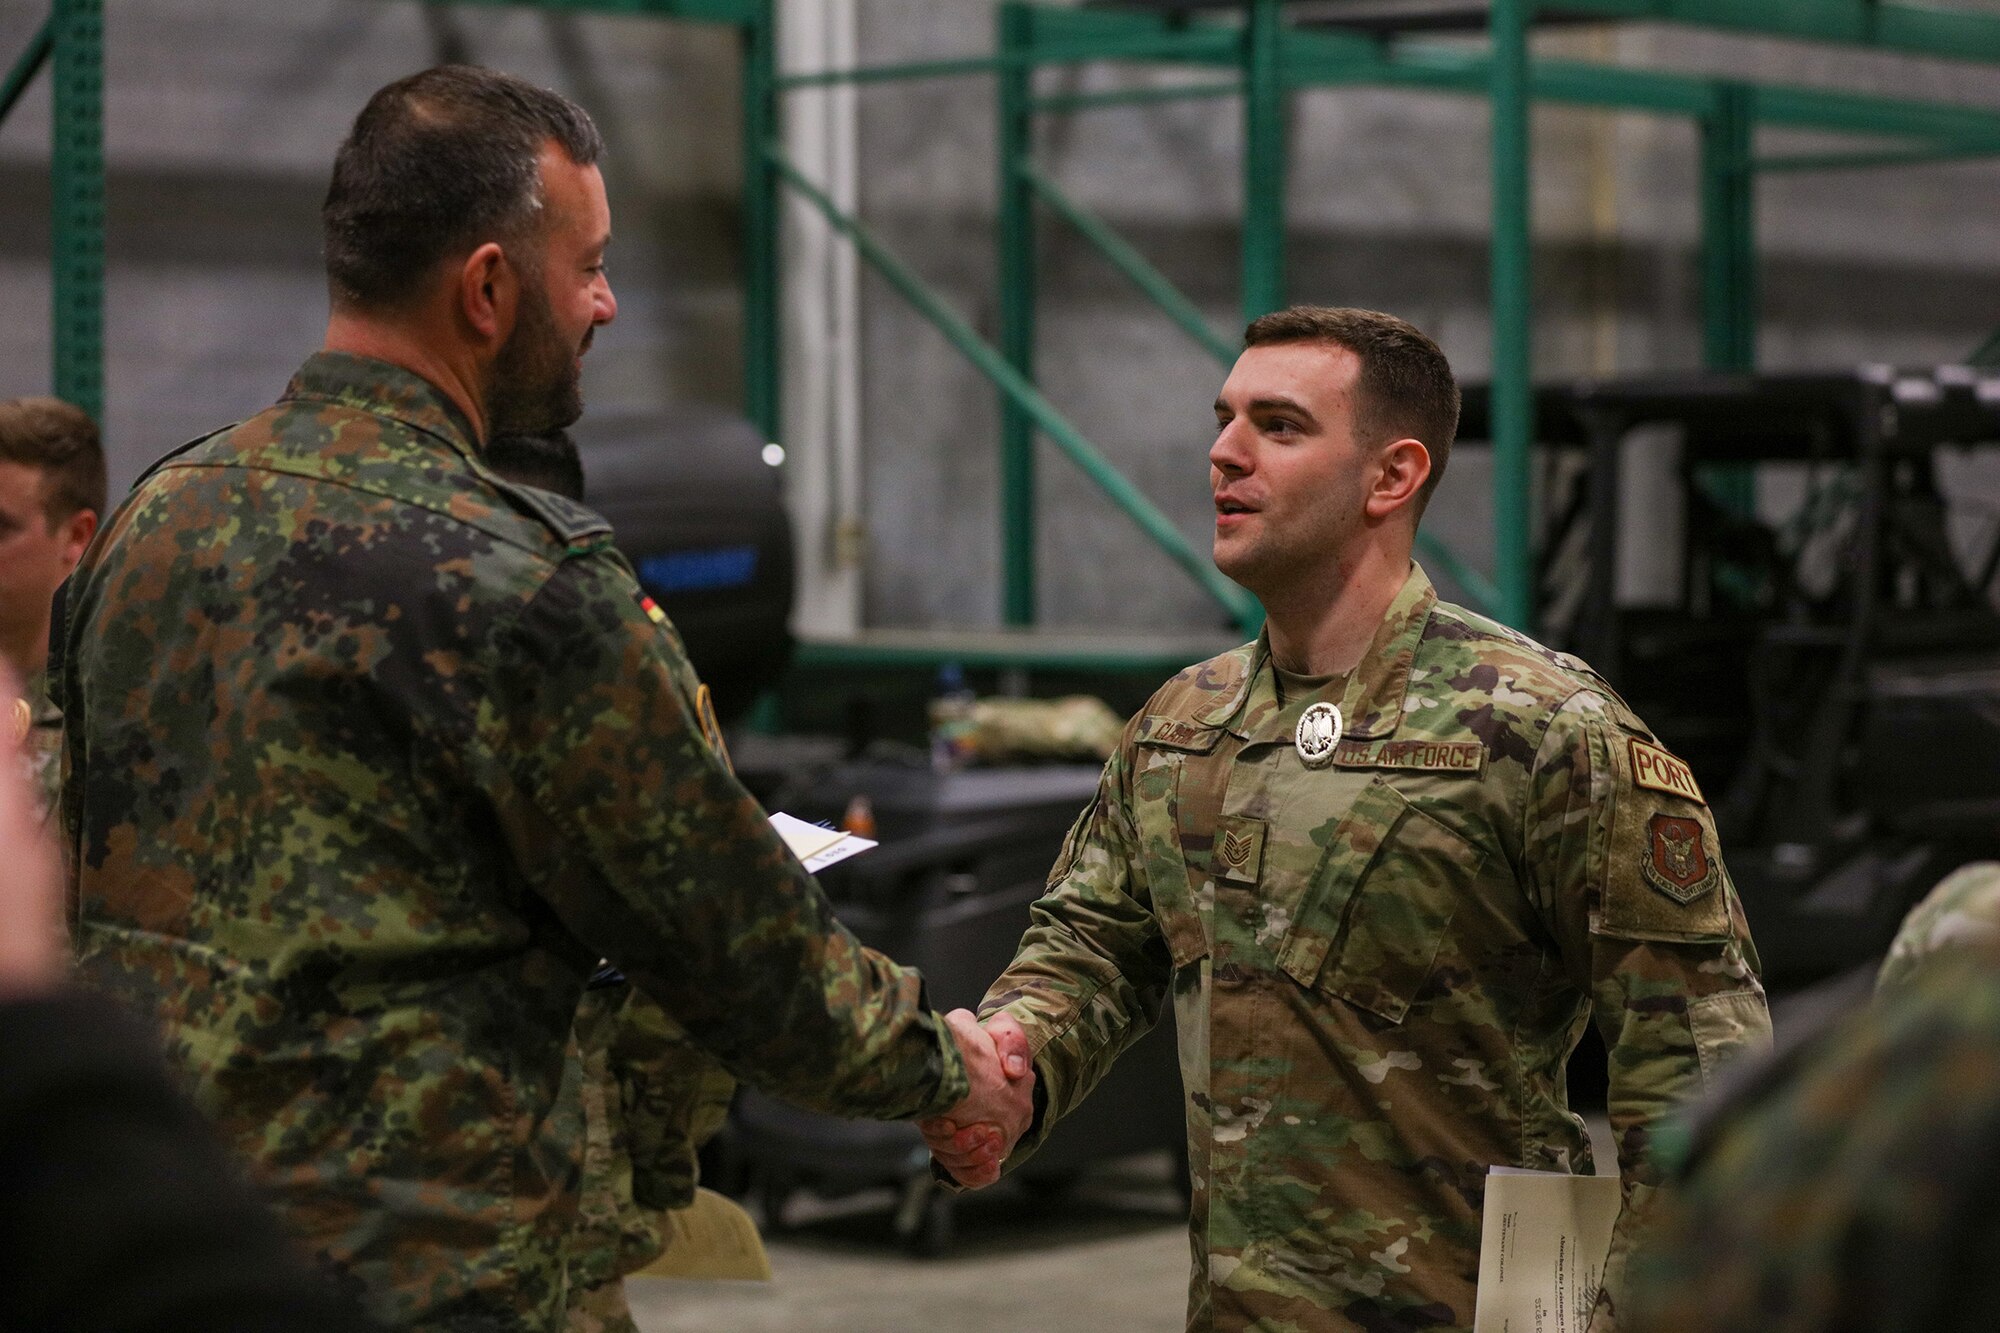 Master Sgt. Frederic Geiss, German Armed Forces team member, congratulates Tech. Sgt. Gabriel Clark, 87th Aerial Port Squadron ramp operations representative for competing and earning the silver badge in the German Armed Forces Military Proficiency Badge qualification at Wright-Patterson Air Force Base, Ohio, Feb. 3, 2023.